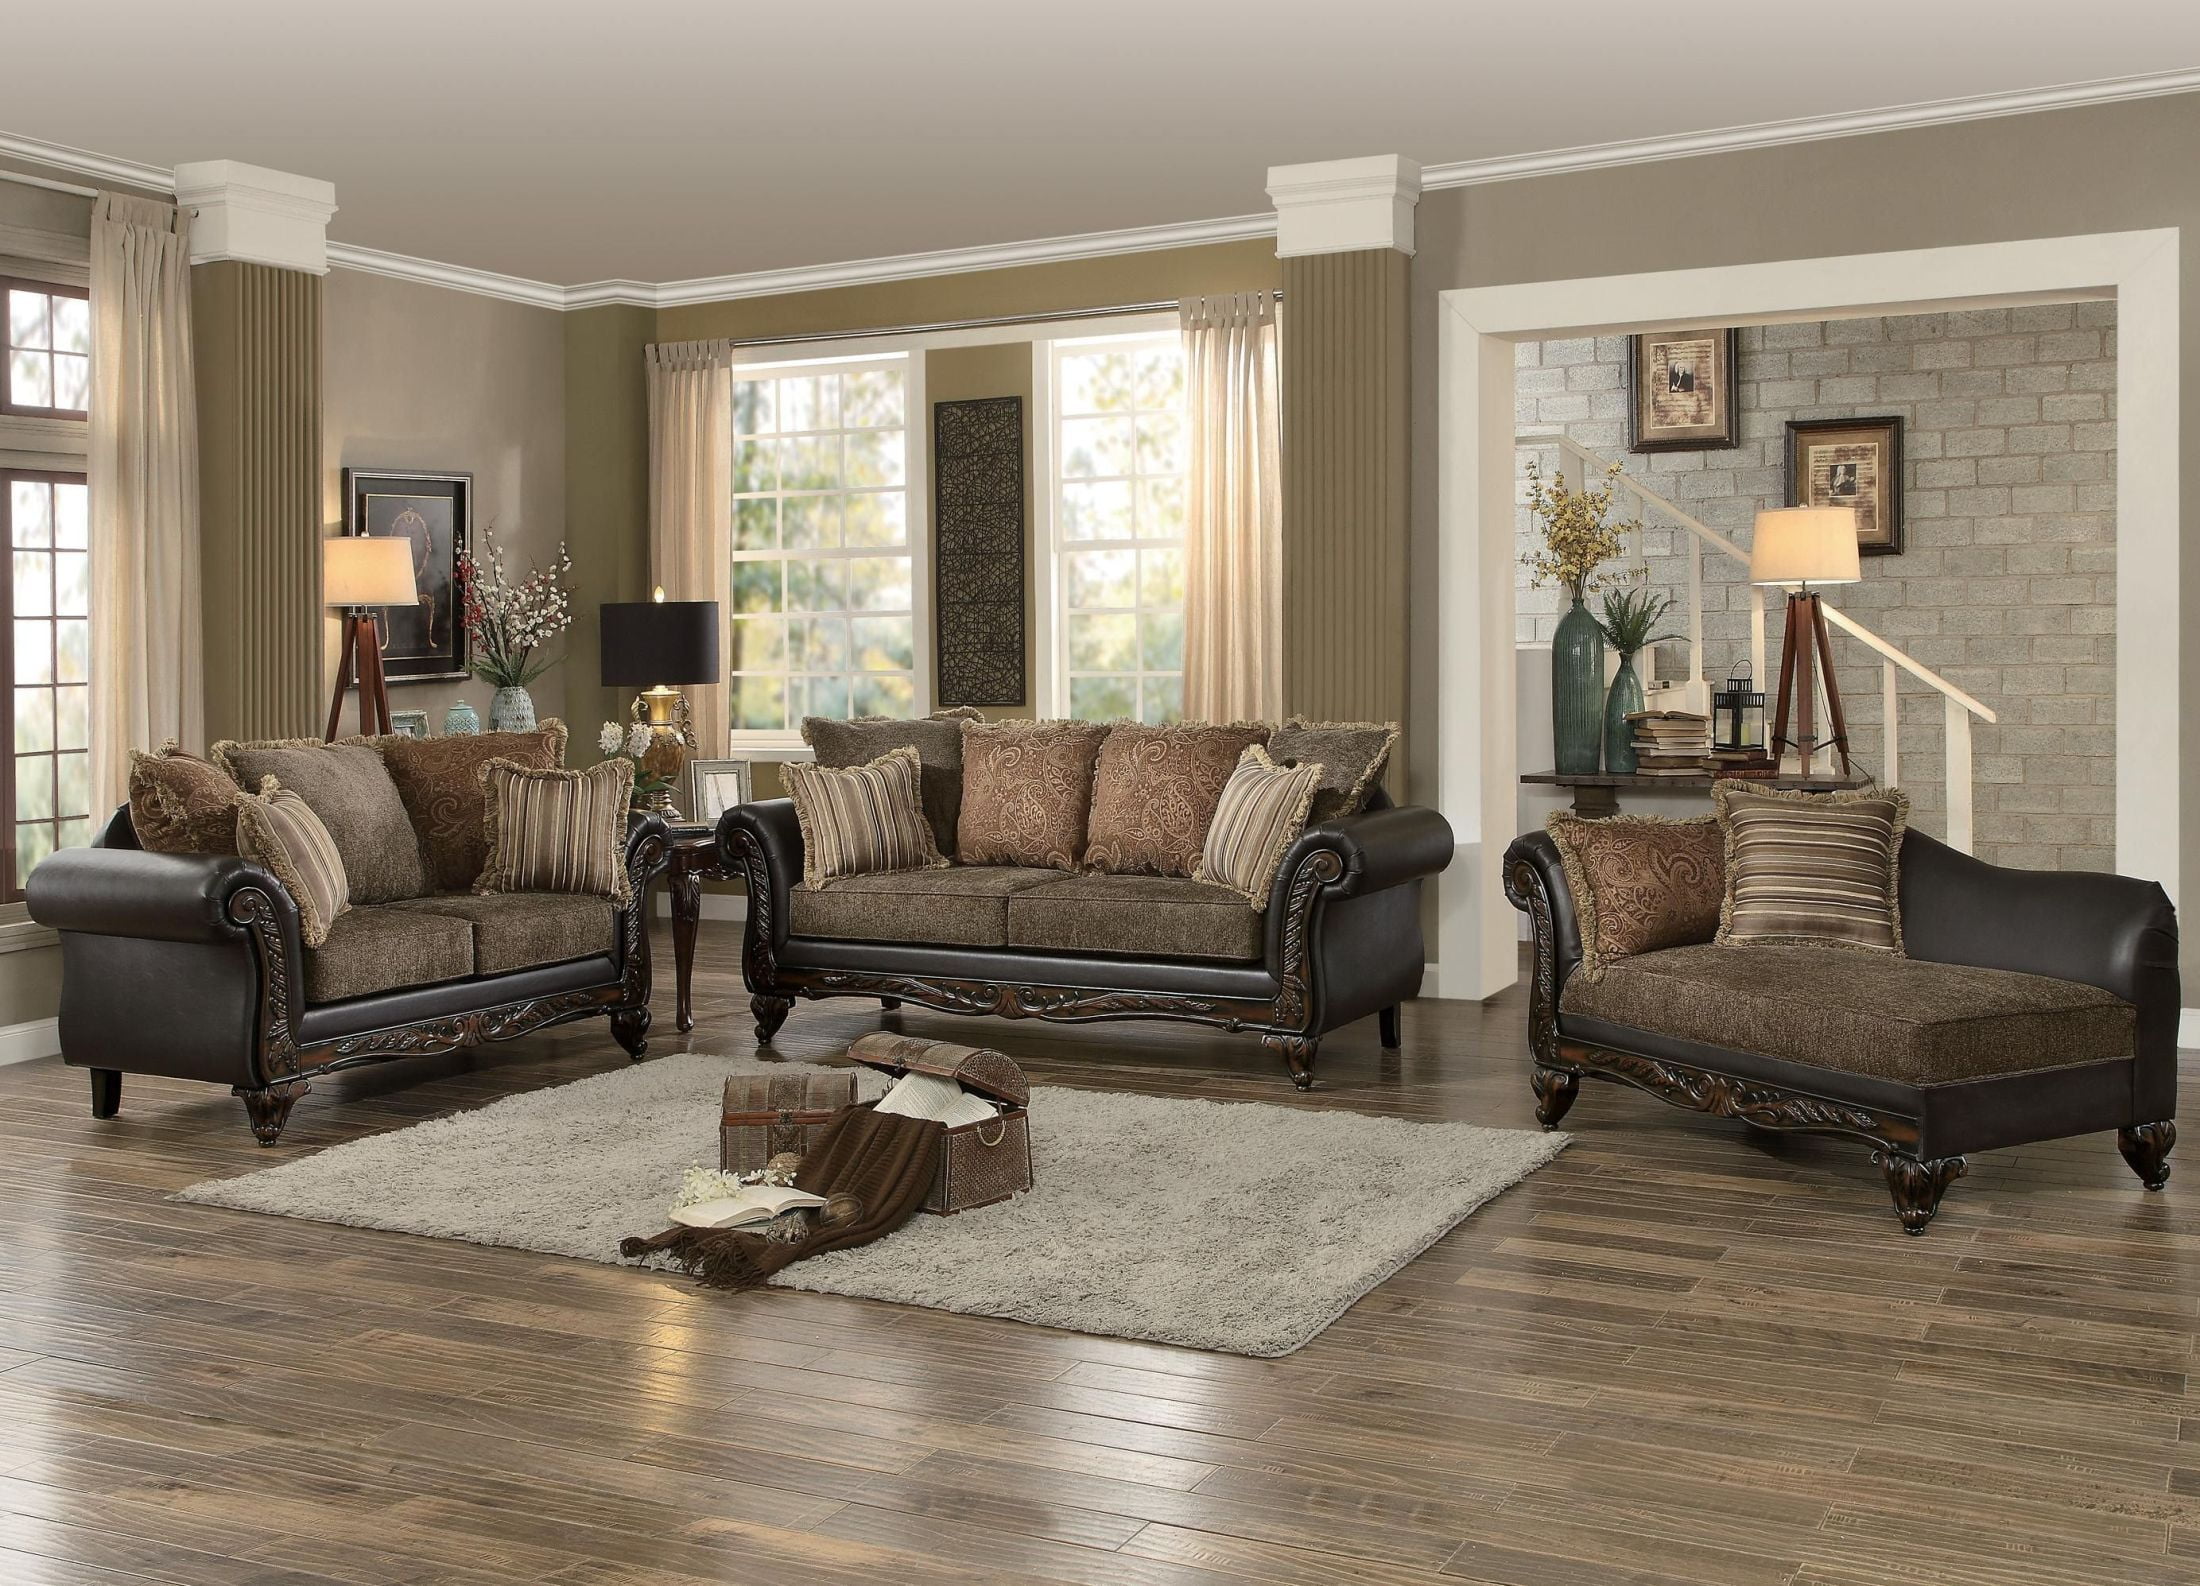 Explore 89+ Alluring Brown Living Room Sets From Levin Satisfy Your Imagination